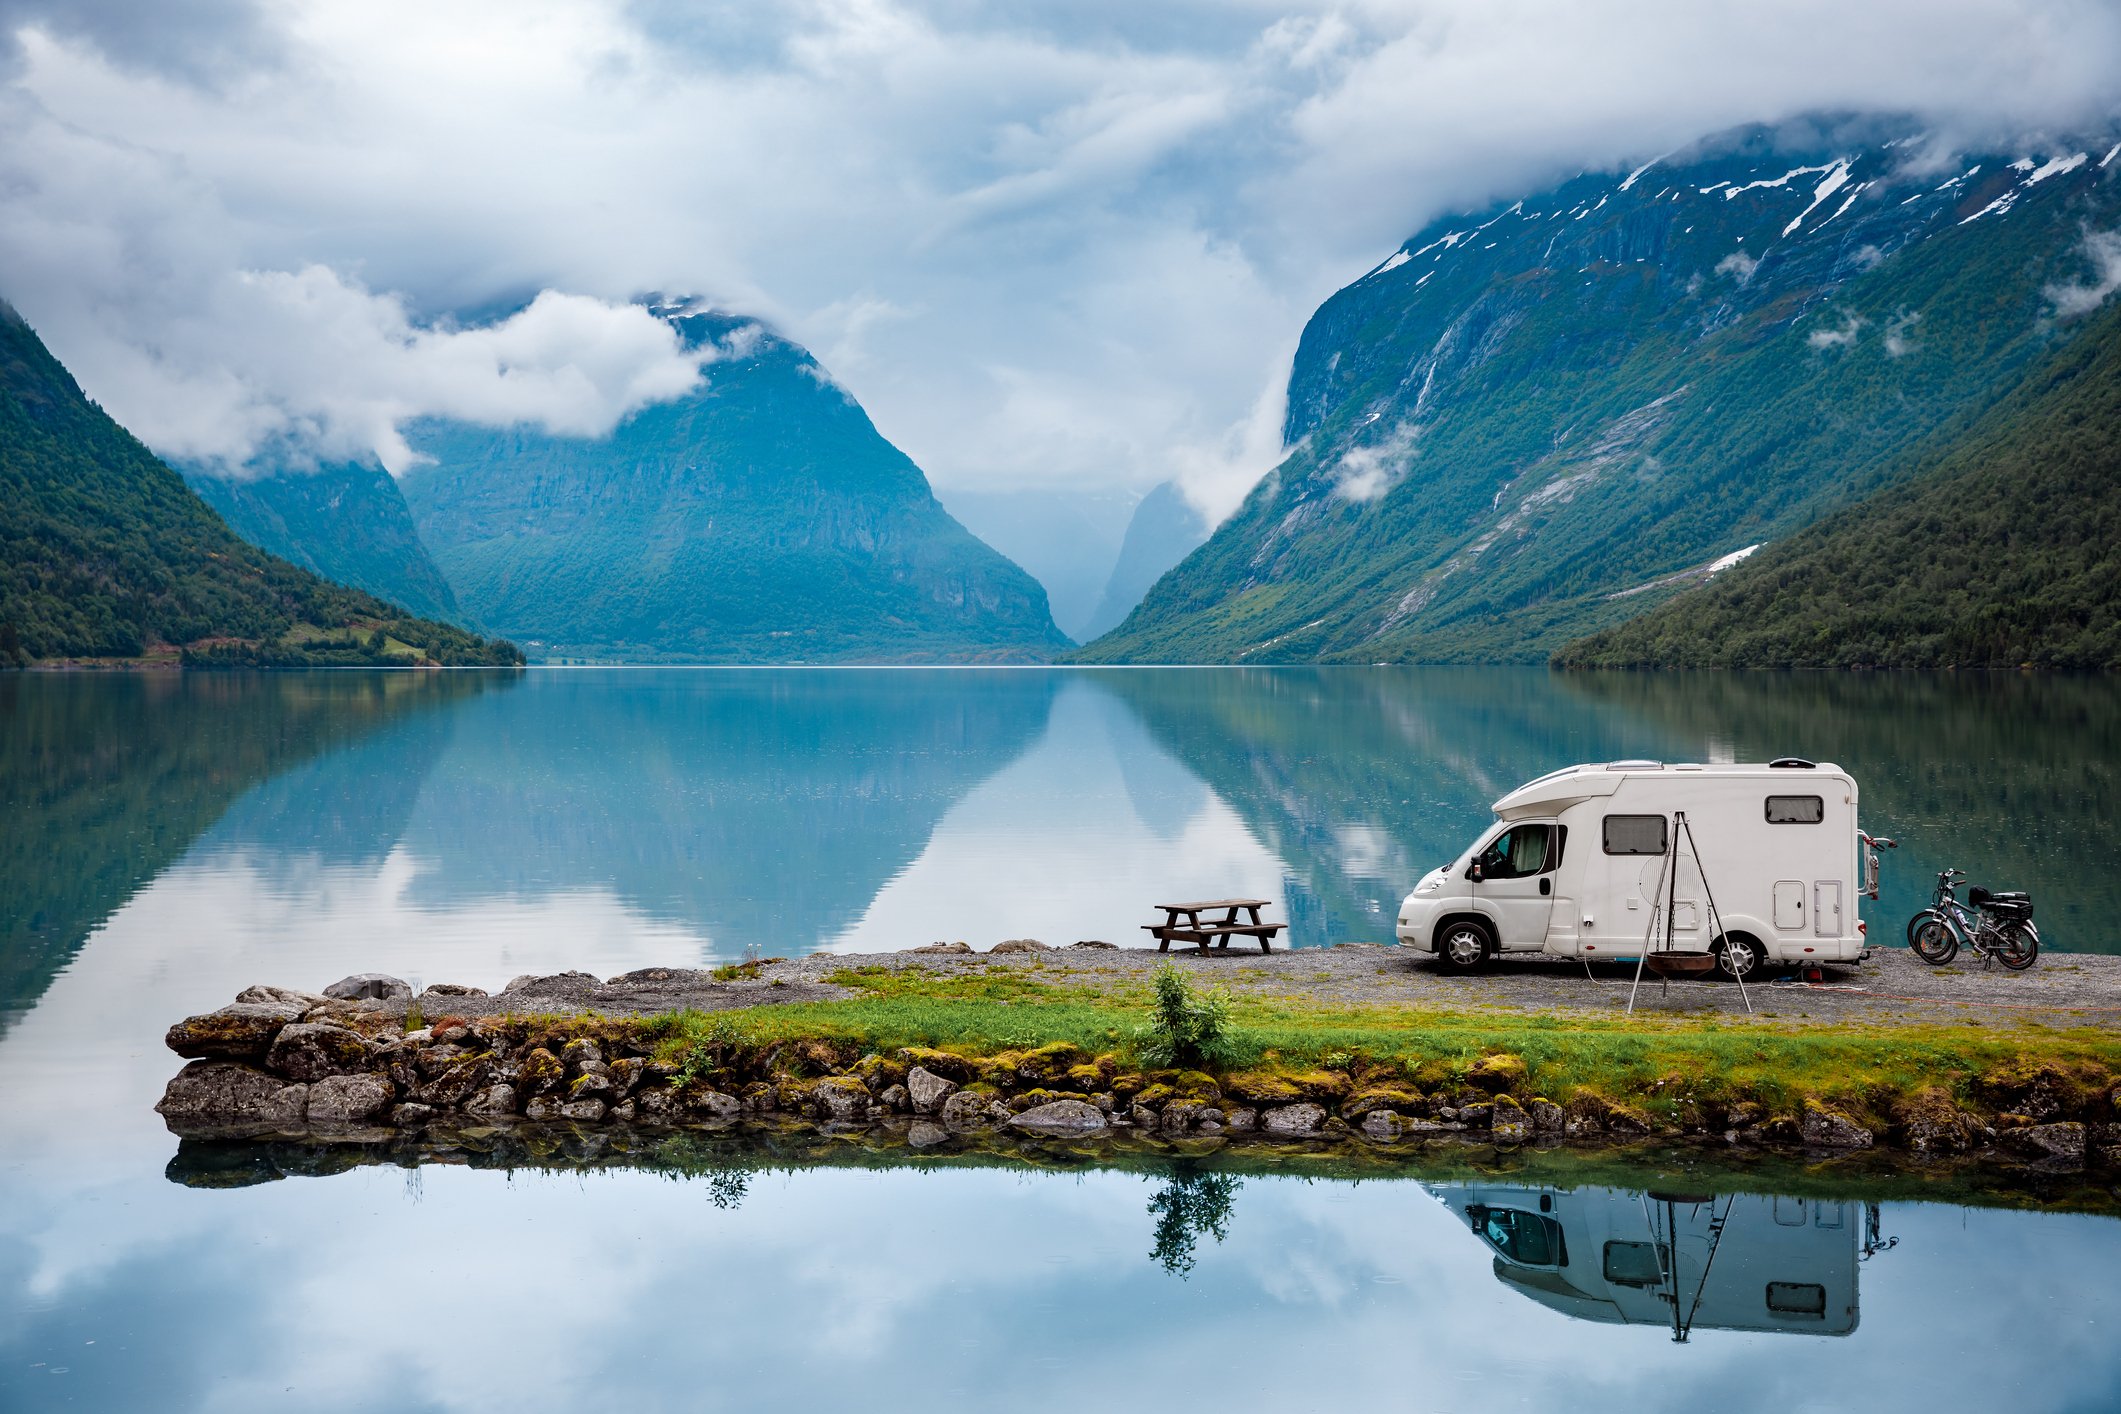 Renting out your RVs? Here’s how to keep things eco-friendly.